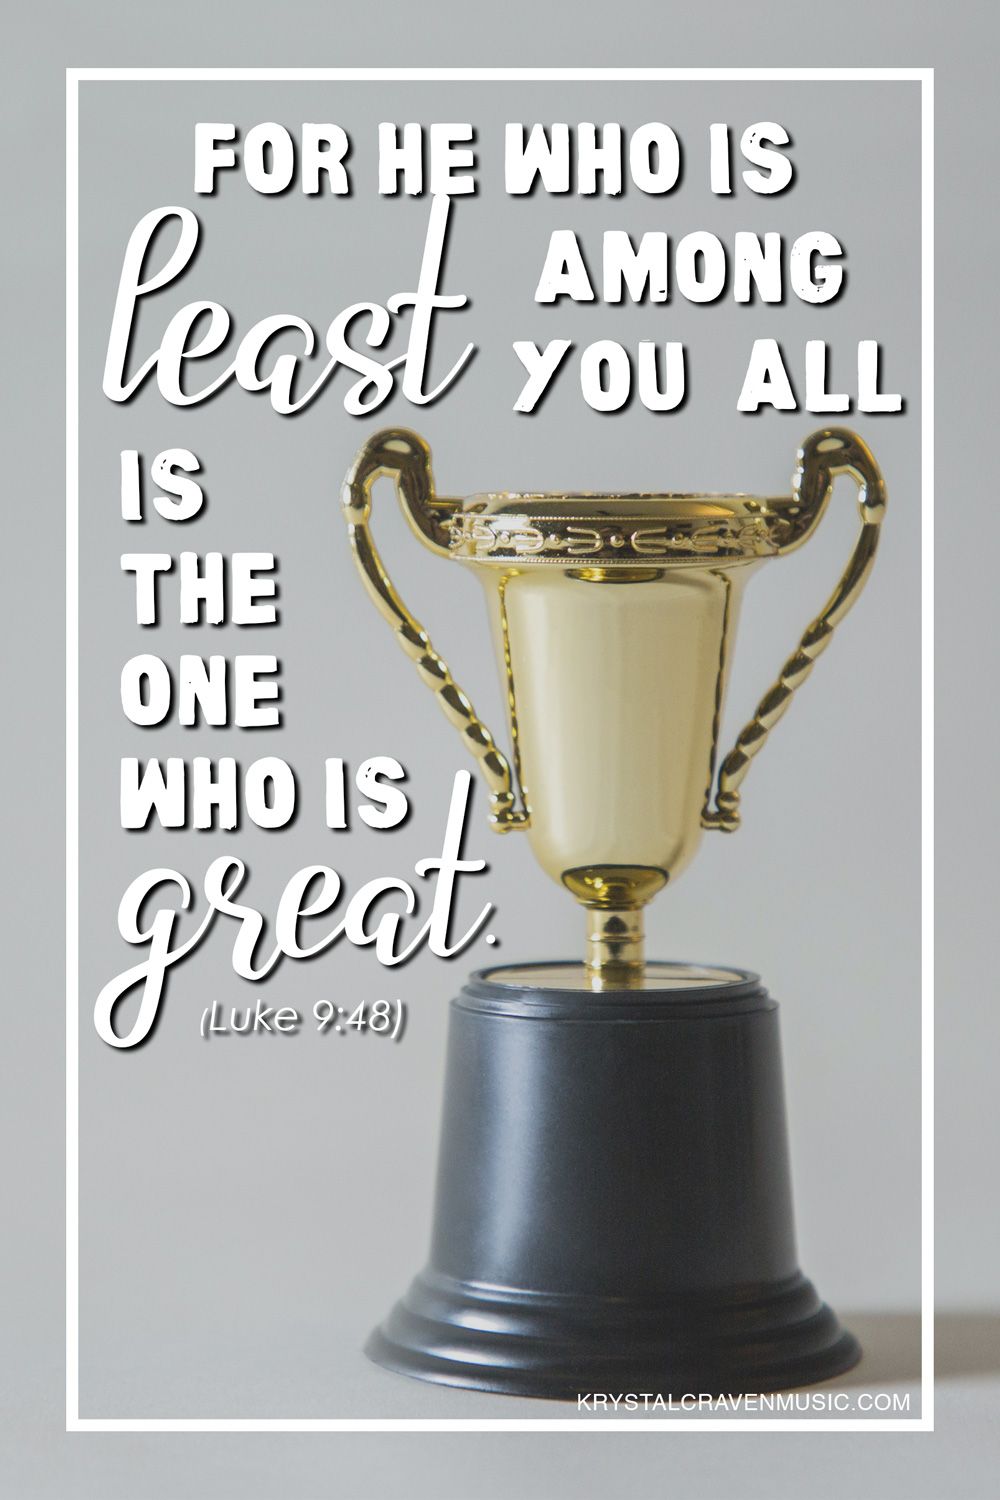 The Bible verse text from Luke 9:48, "For he who is least among you all is the one who is great" in white text wrapping a trophy on a gray background.